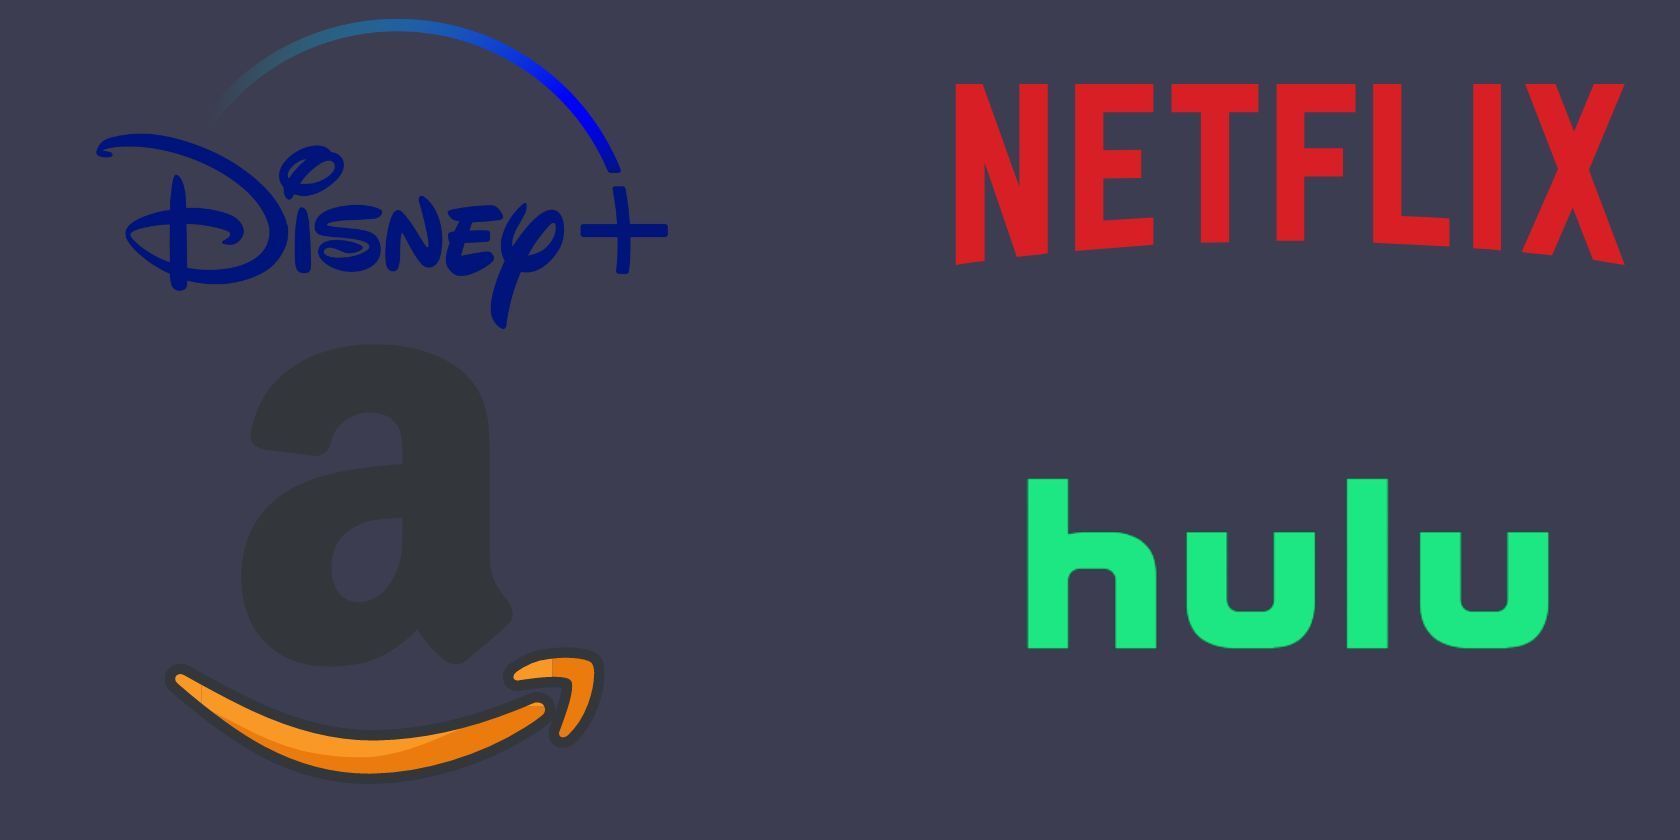 The logos for Disney Plus Netflix Hulu and Amazon over a grey background